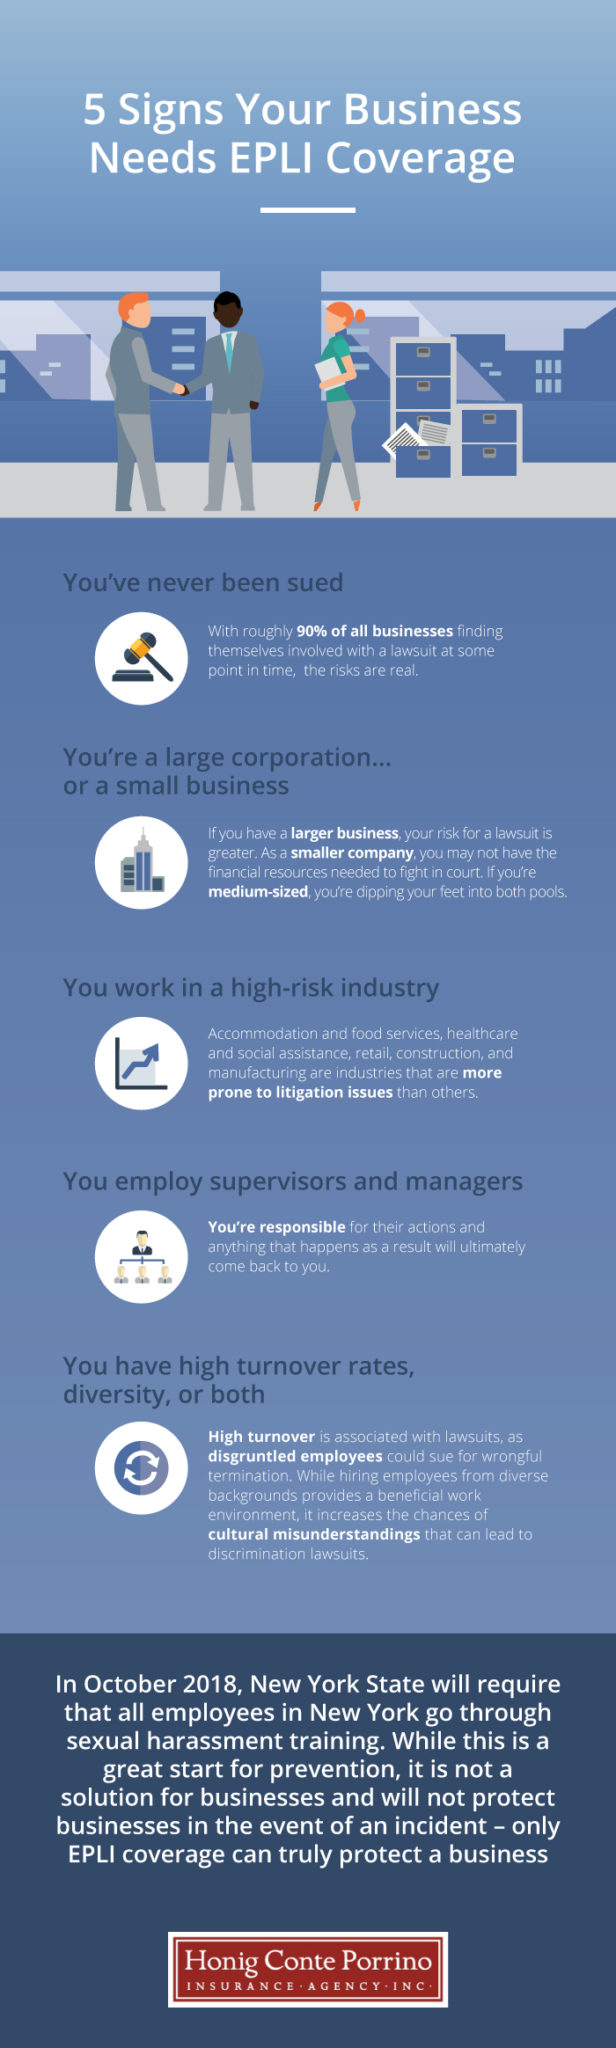 infographic on the 5 signs your business needs EPLI coverage.